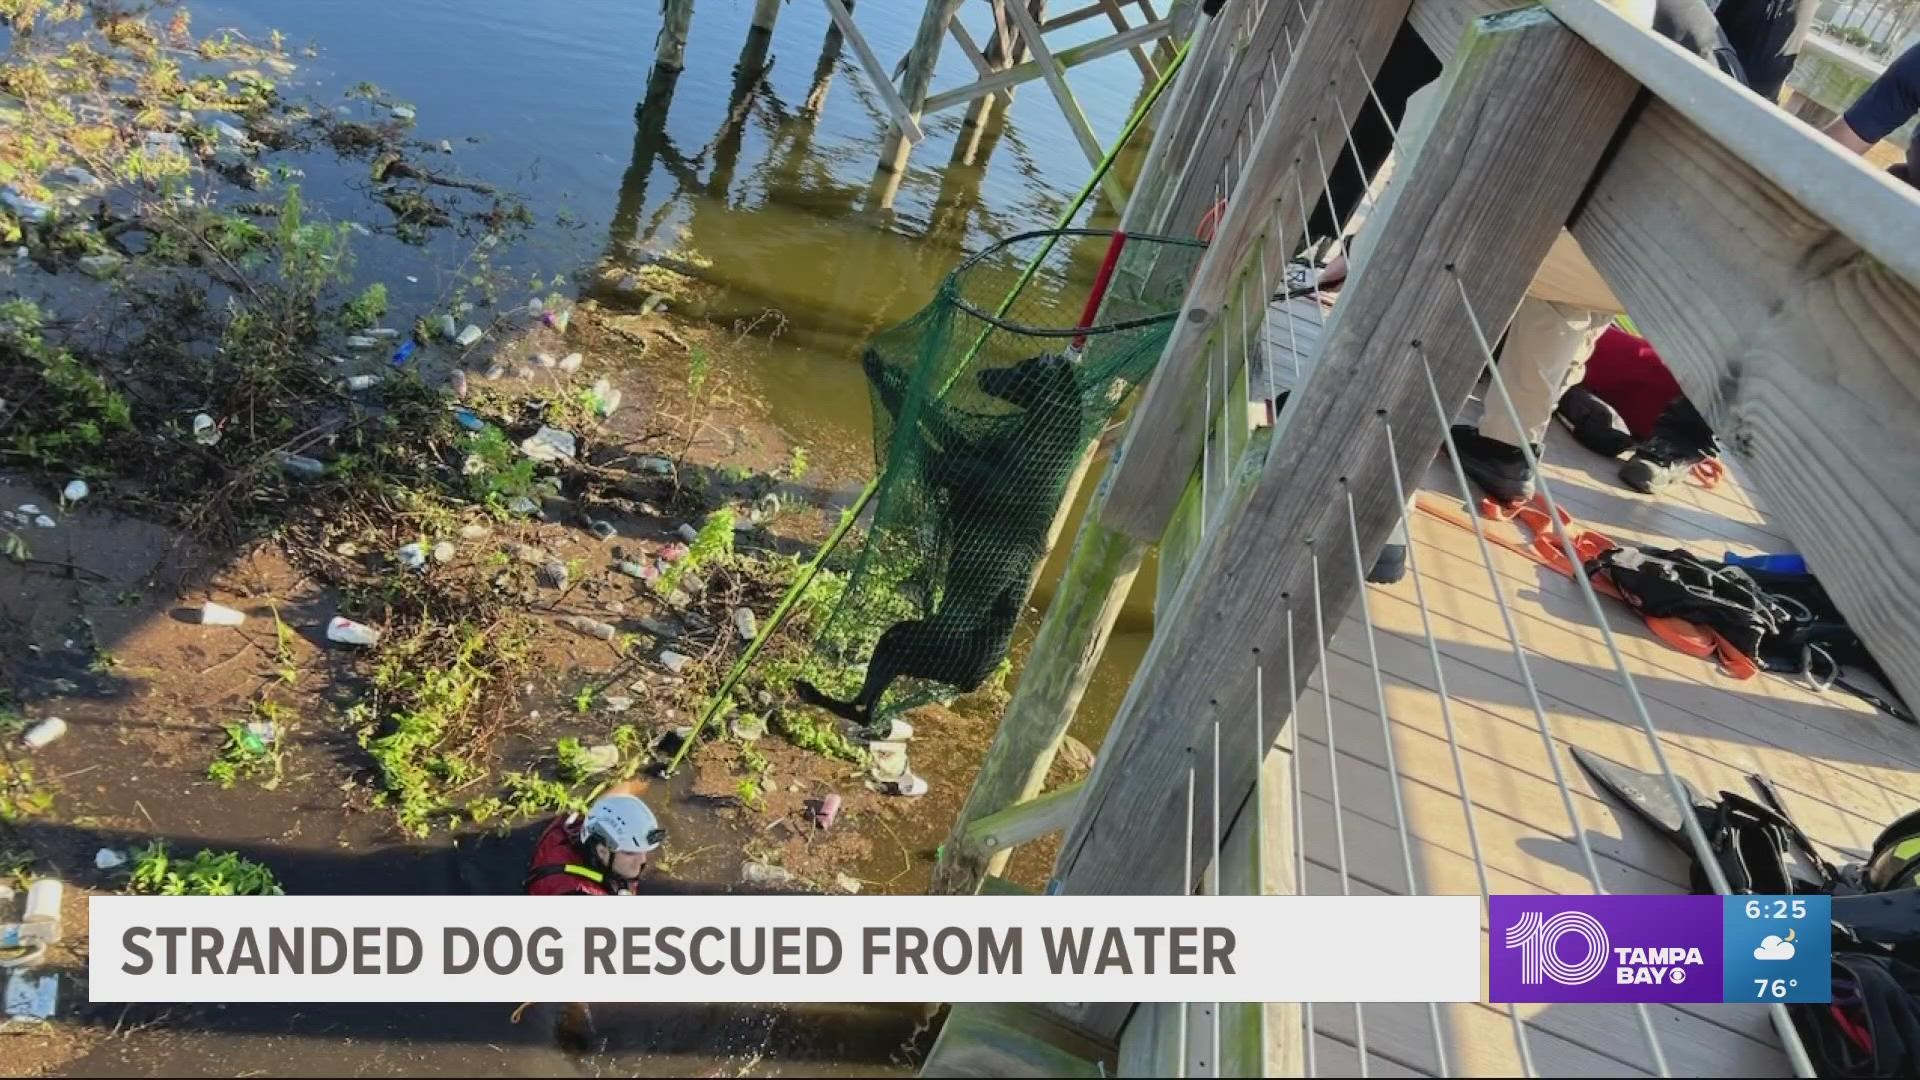 The dog was found on "some floating vegetation" in the water at Lucy Dell Park, according to Hillsborough County Fire Rescue.